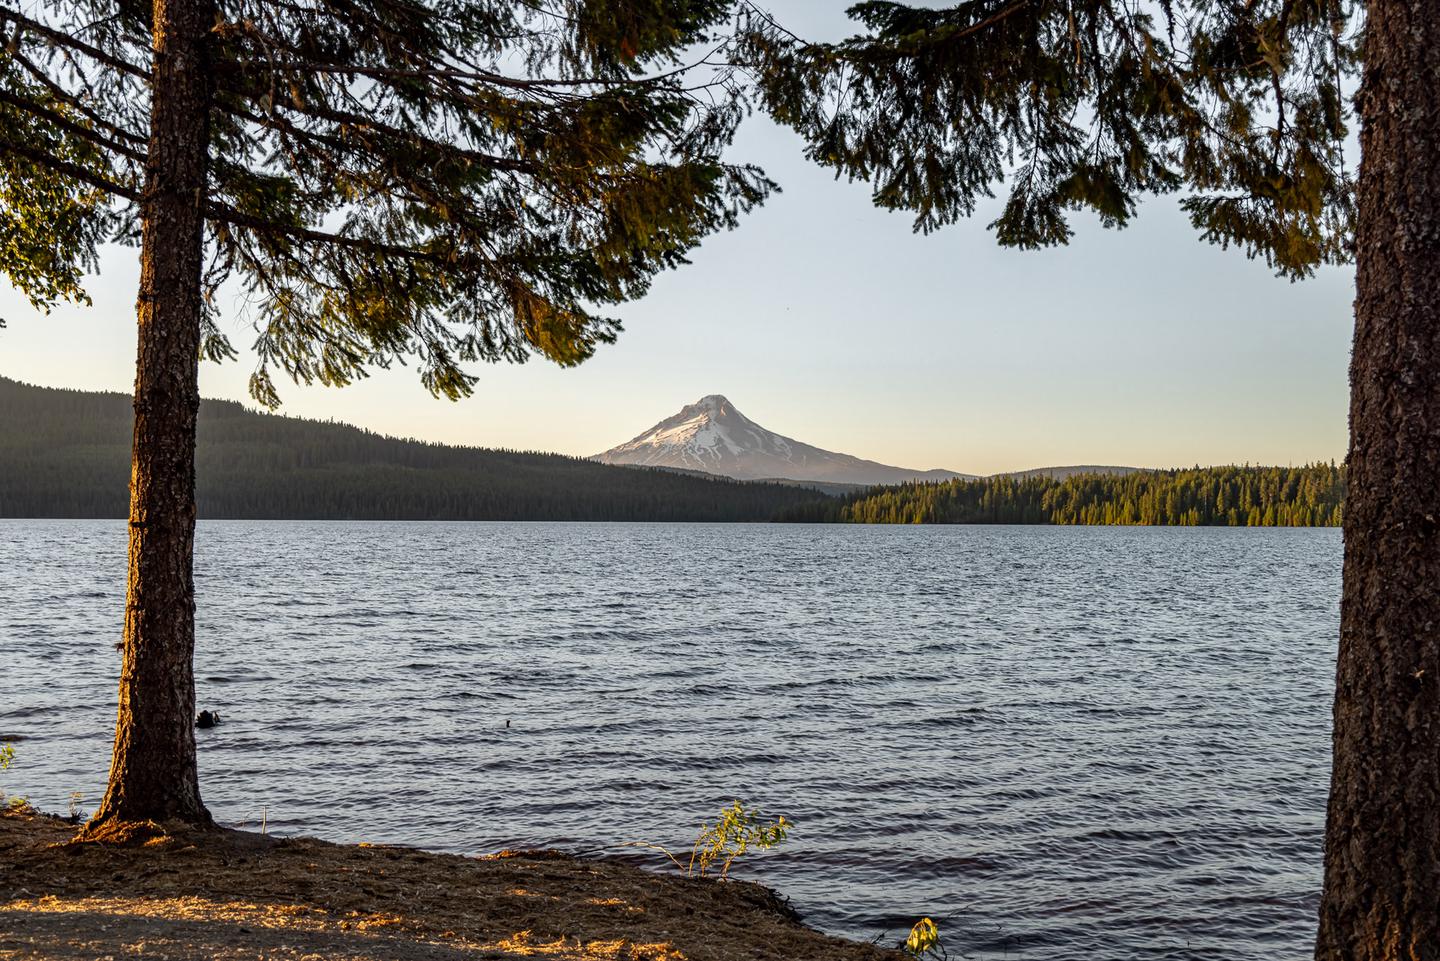 View of Mount Hood from Stone Creek Campground shoreline